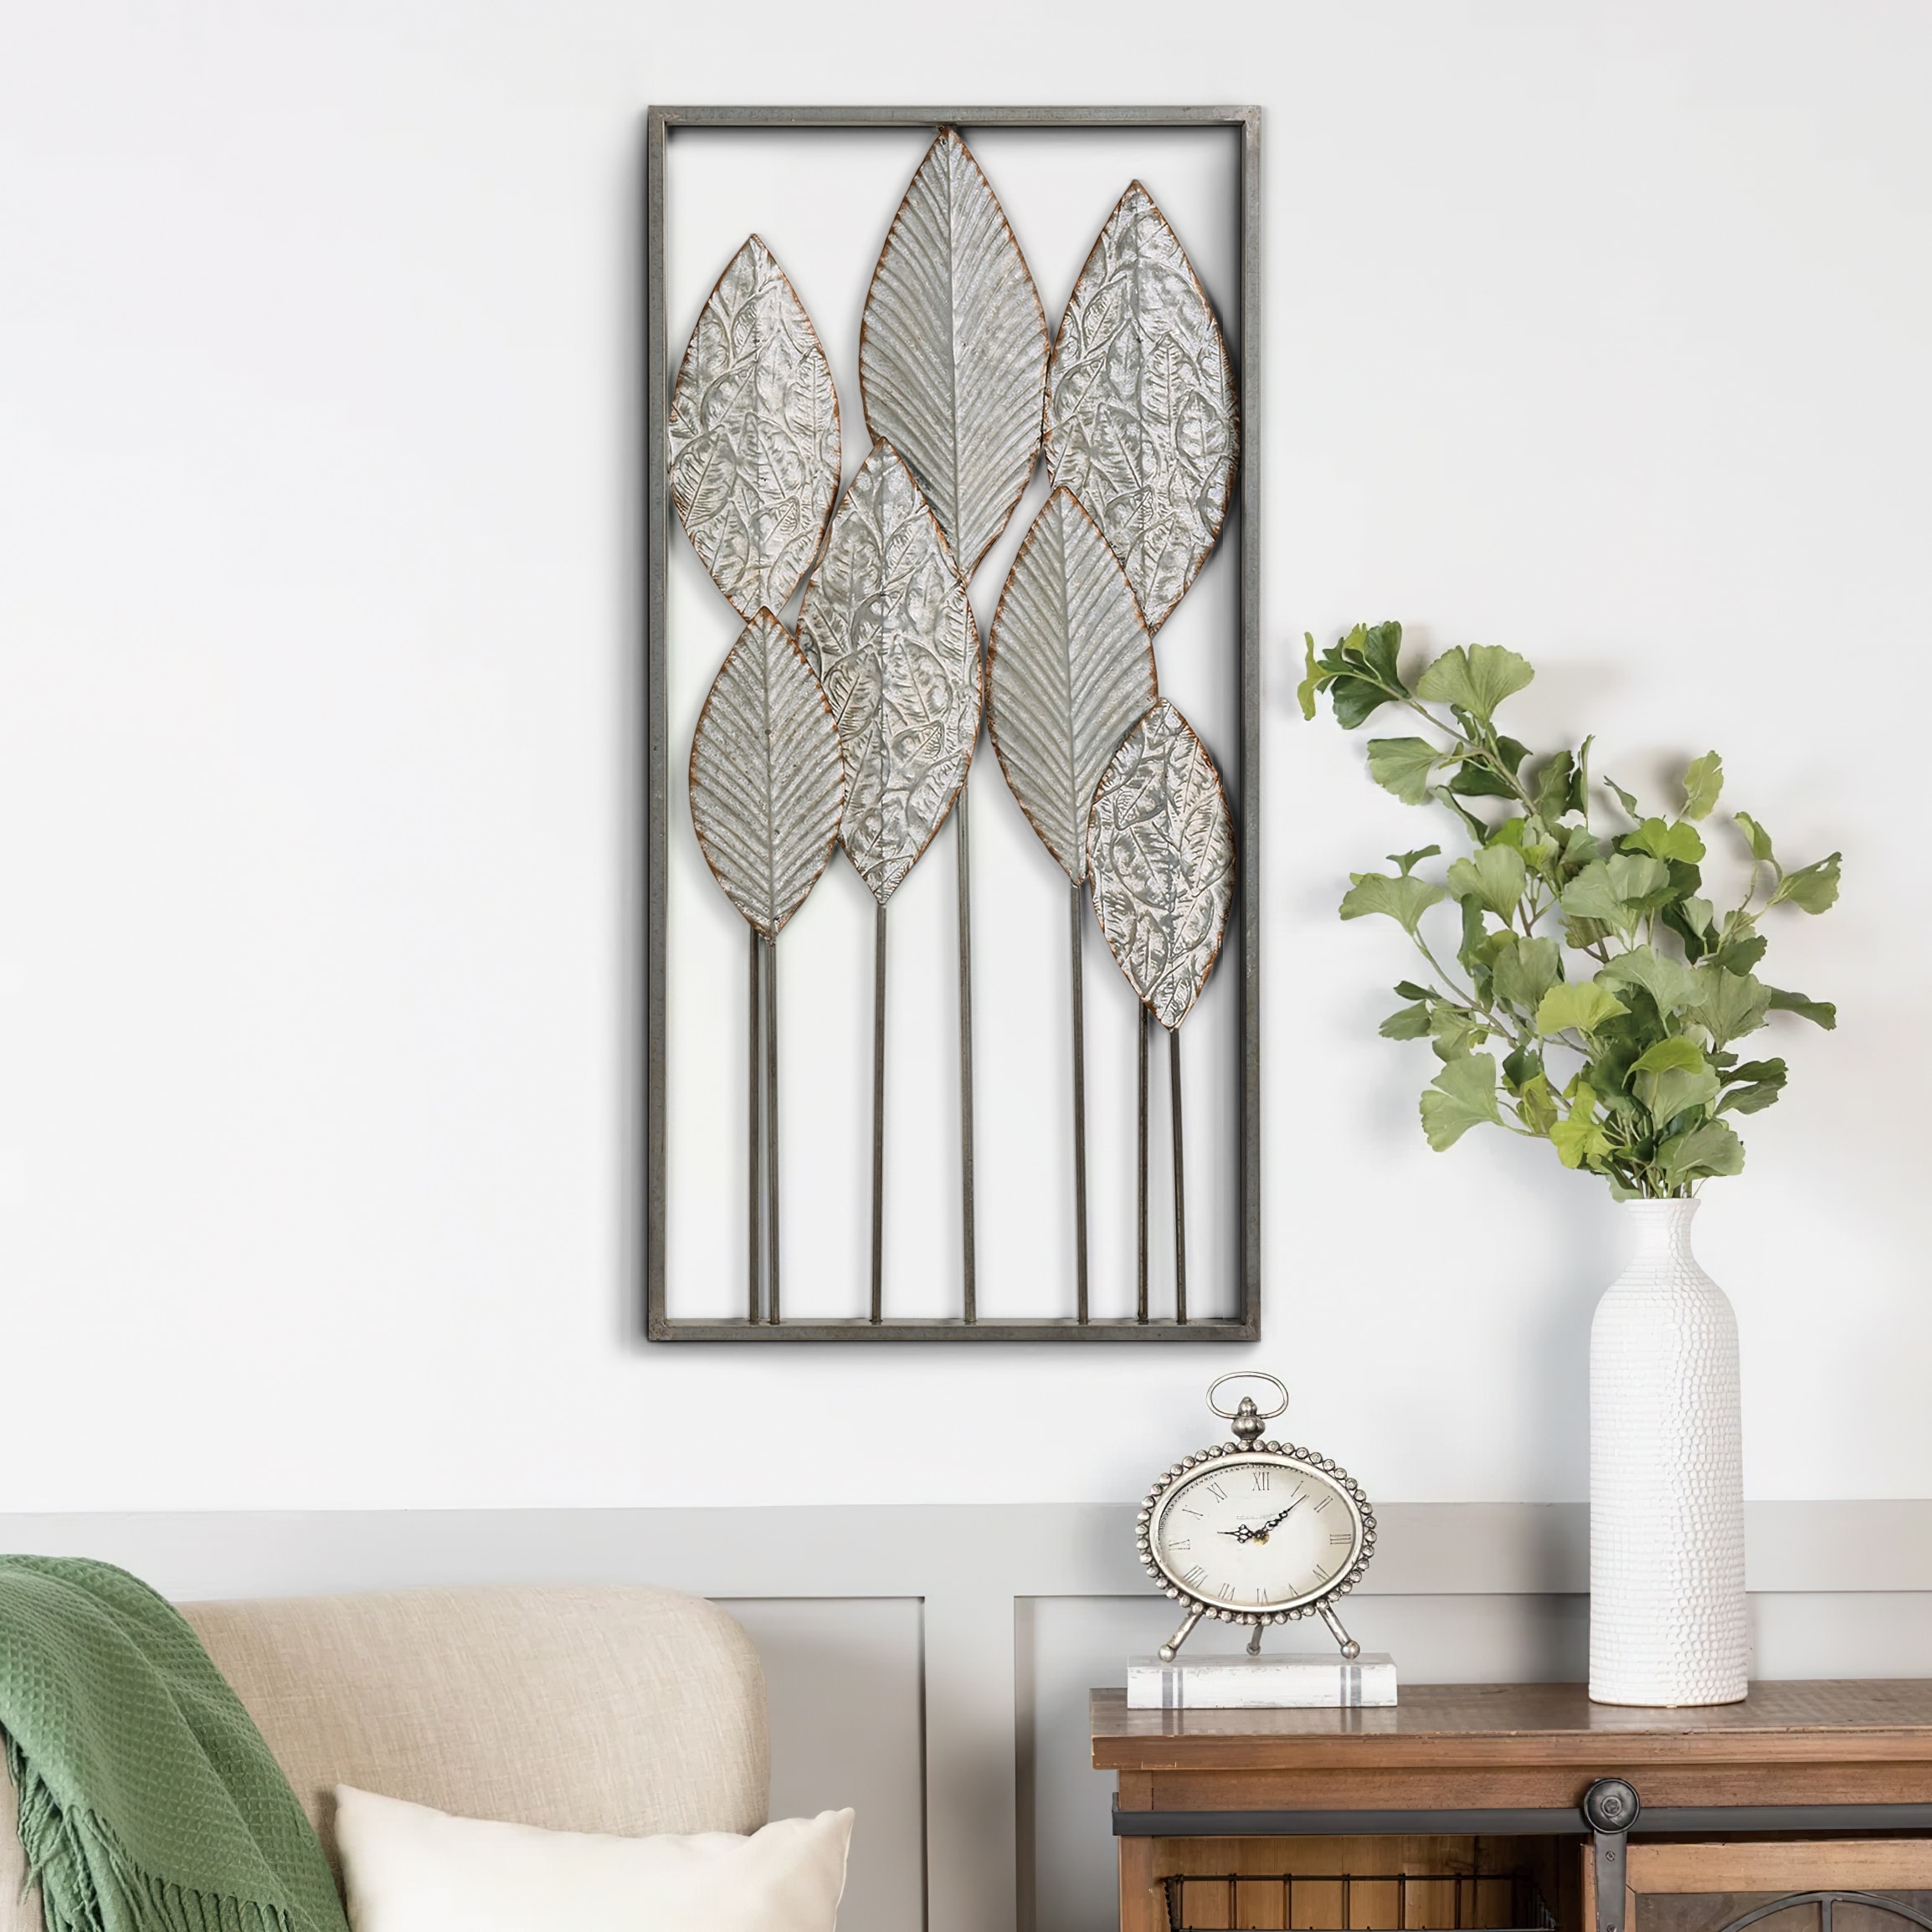 COZAYH Farmhouse Metal Leaves Wall Decor, Distressed Wall Art Hanging for  Home Living Room Decors Bed Bath  Beyond 36240417